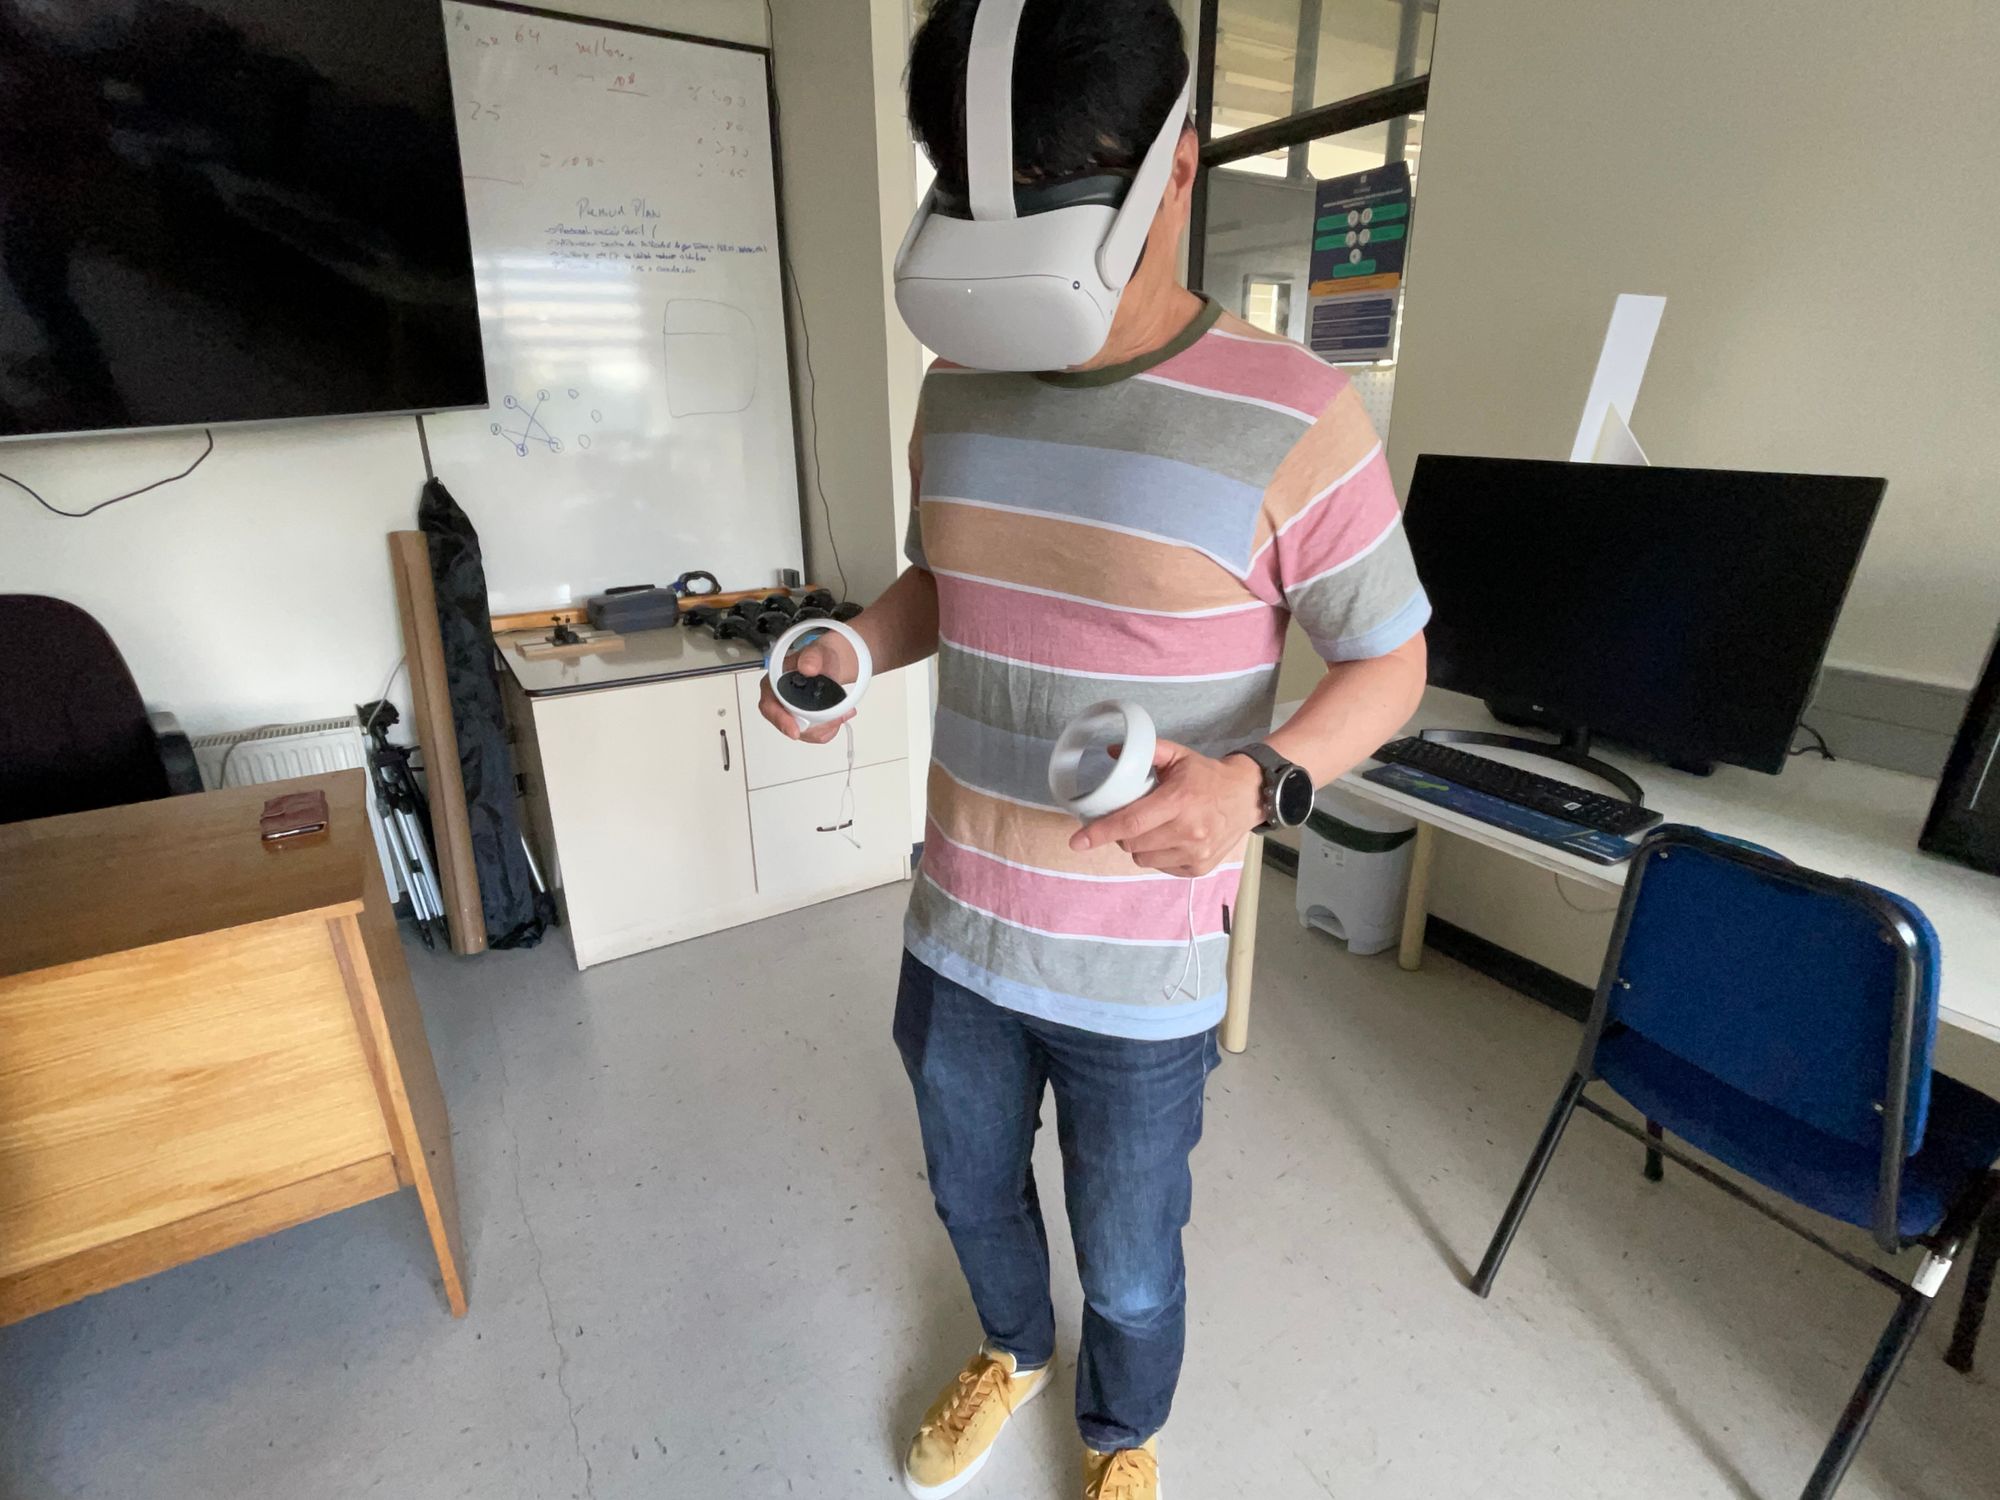 In a small computer lab, a man stands wearing a virtual reality (VR) headset, grasping a VR controller in each hand